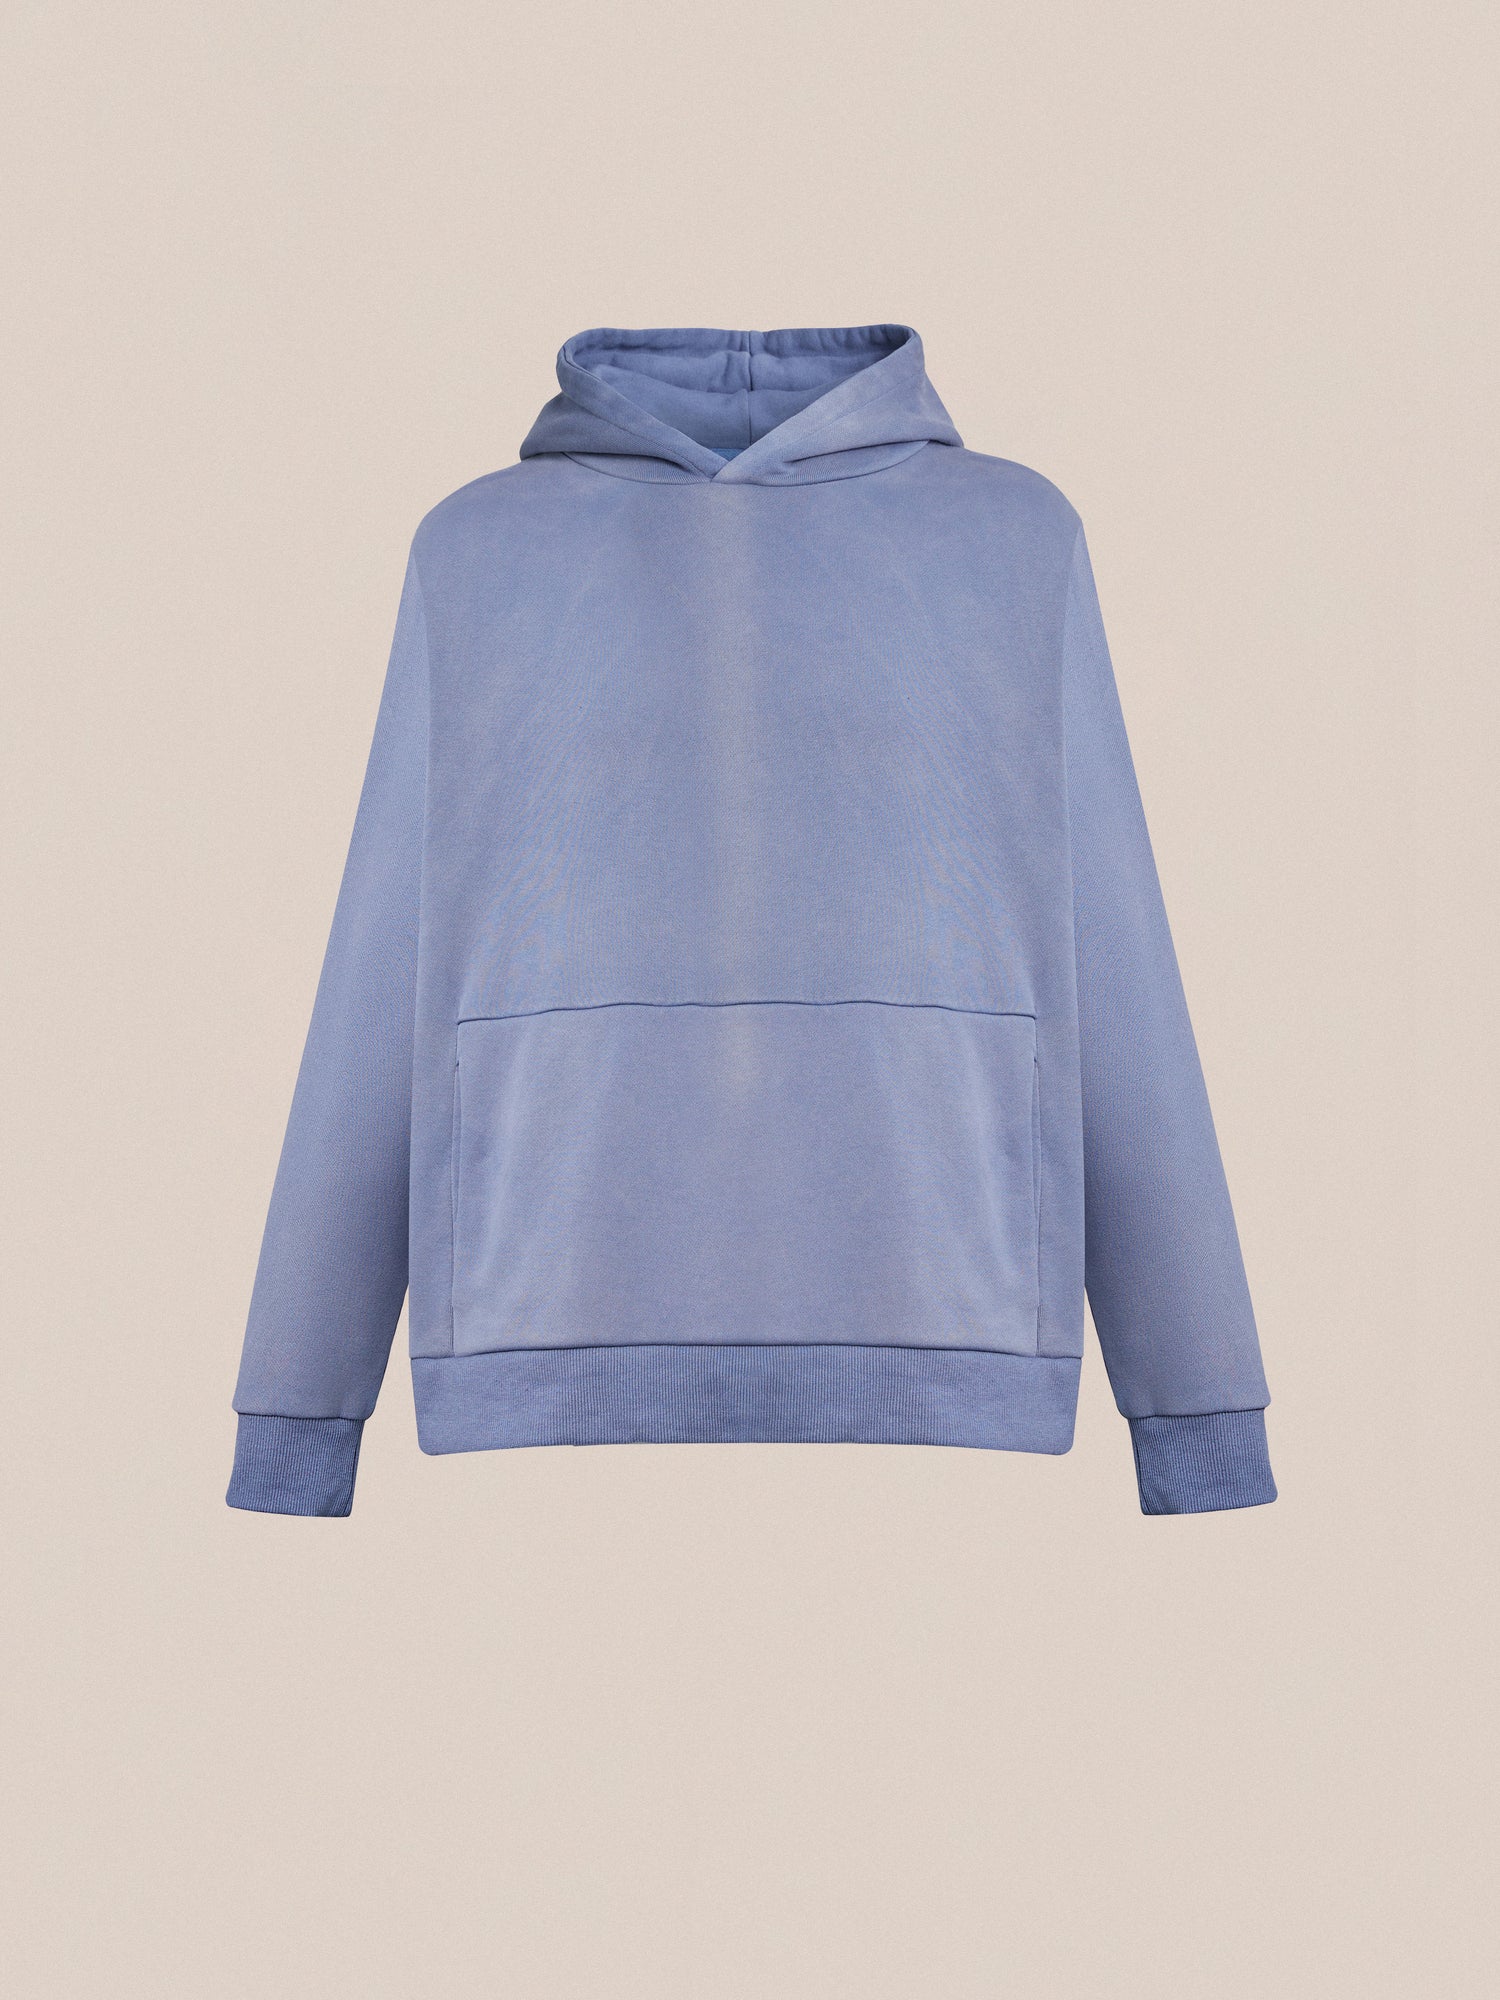 A blue enzyme-washed Found Faded Infinity Hoodie on a white background.